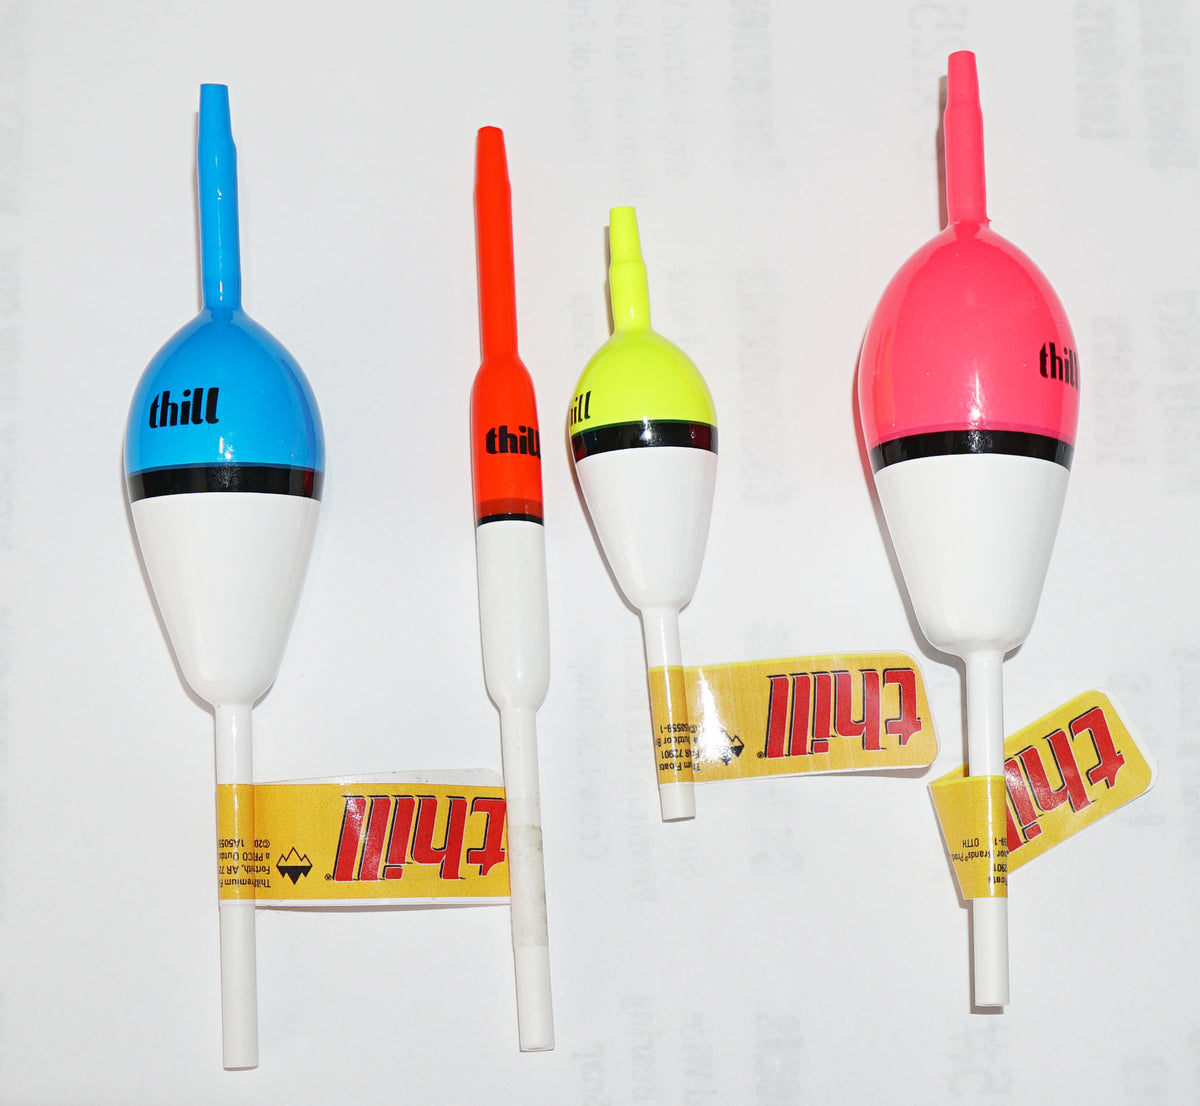 Thill Floats Oval Slip Floats, Size 8 from The Fishin' Hole